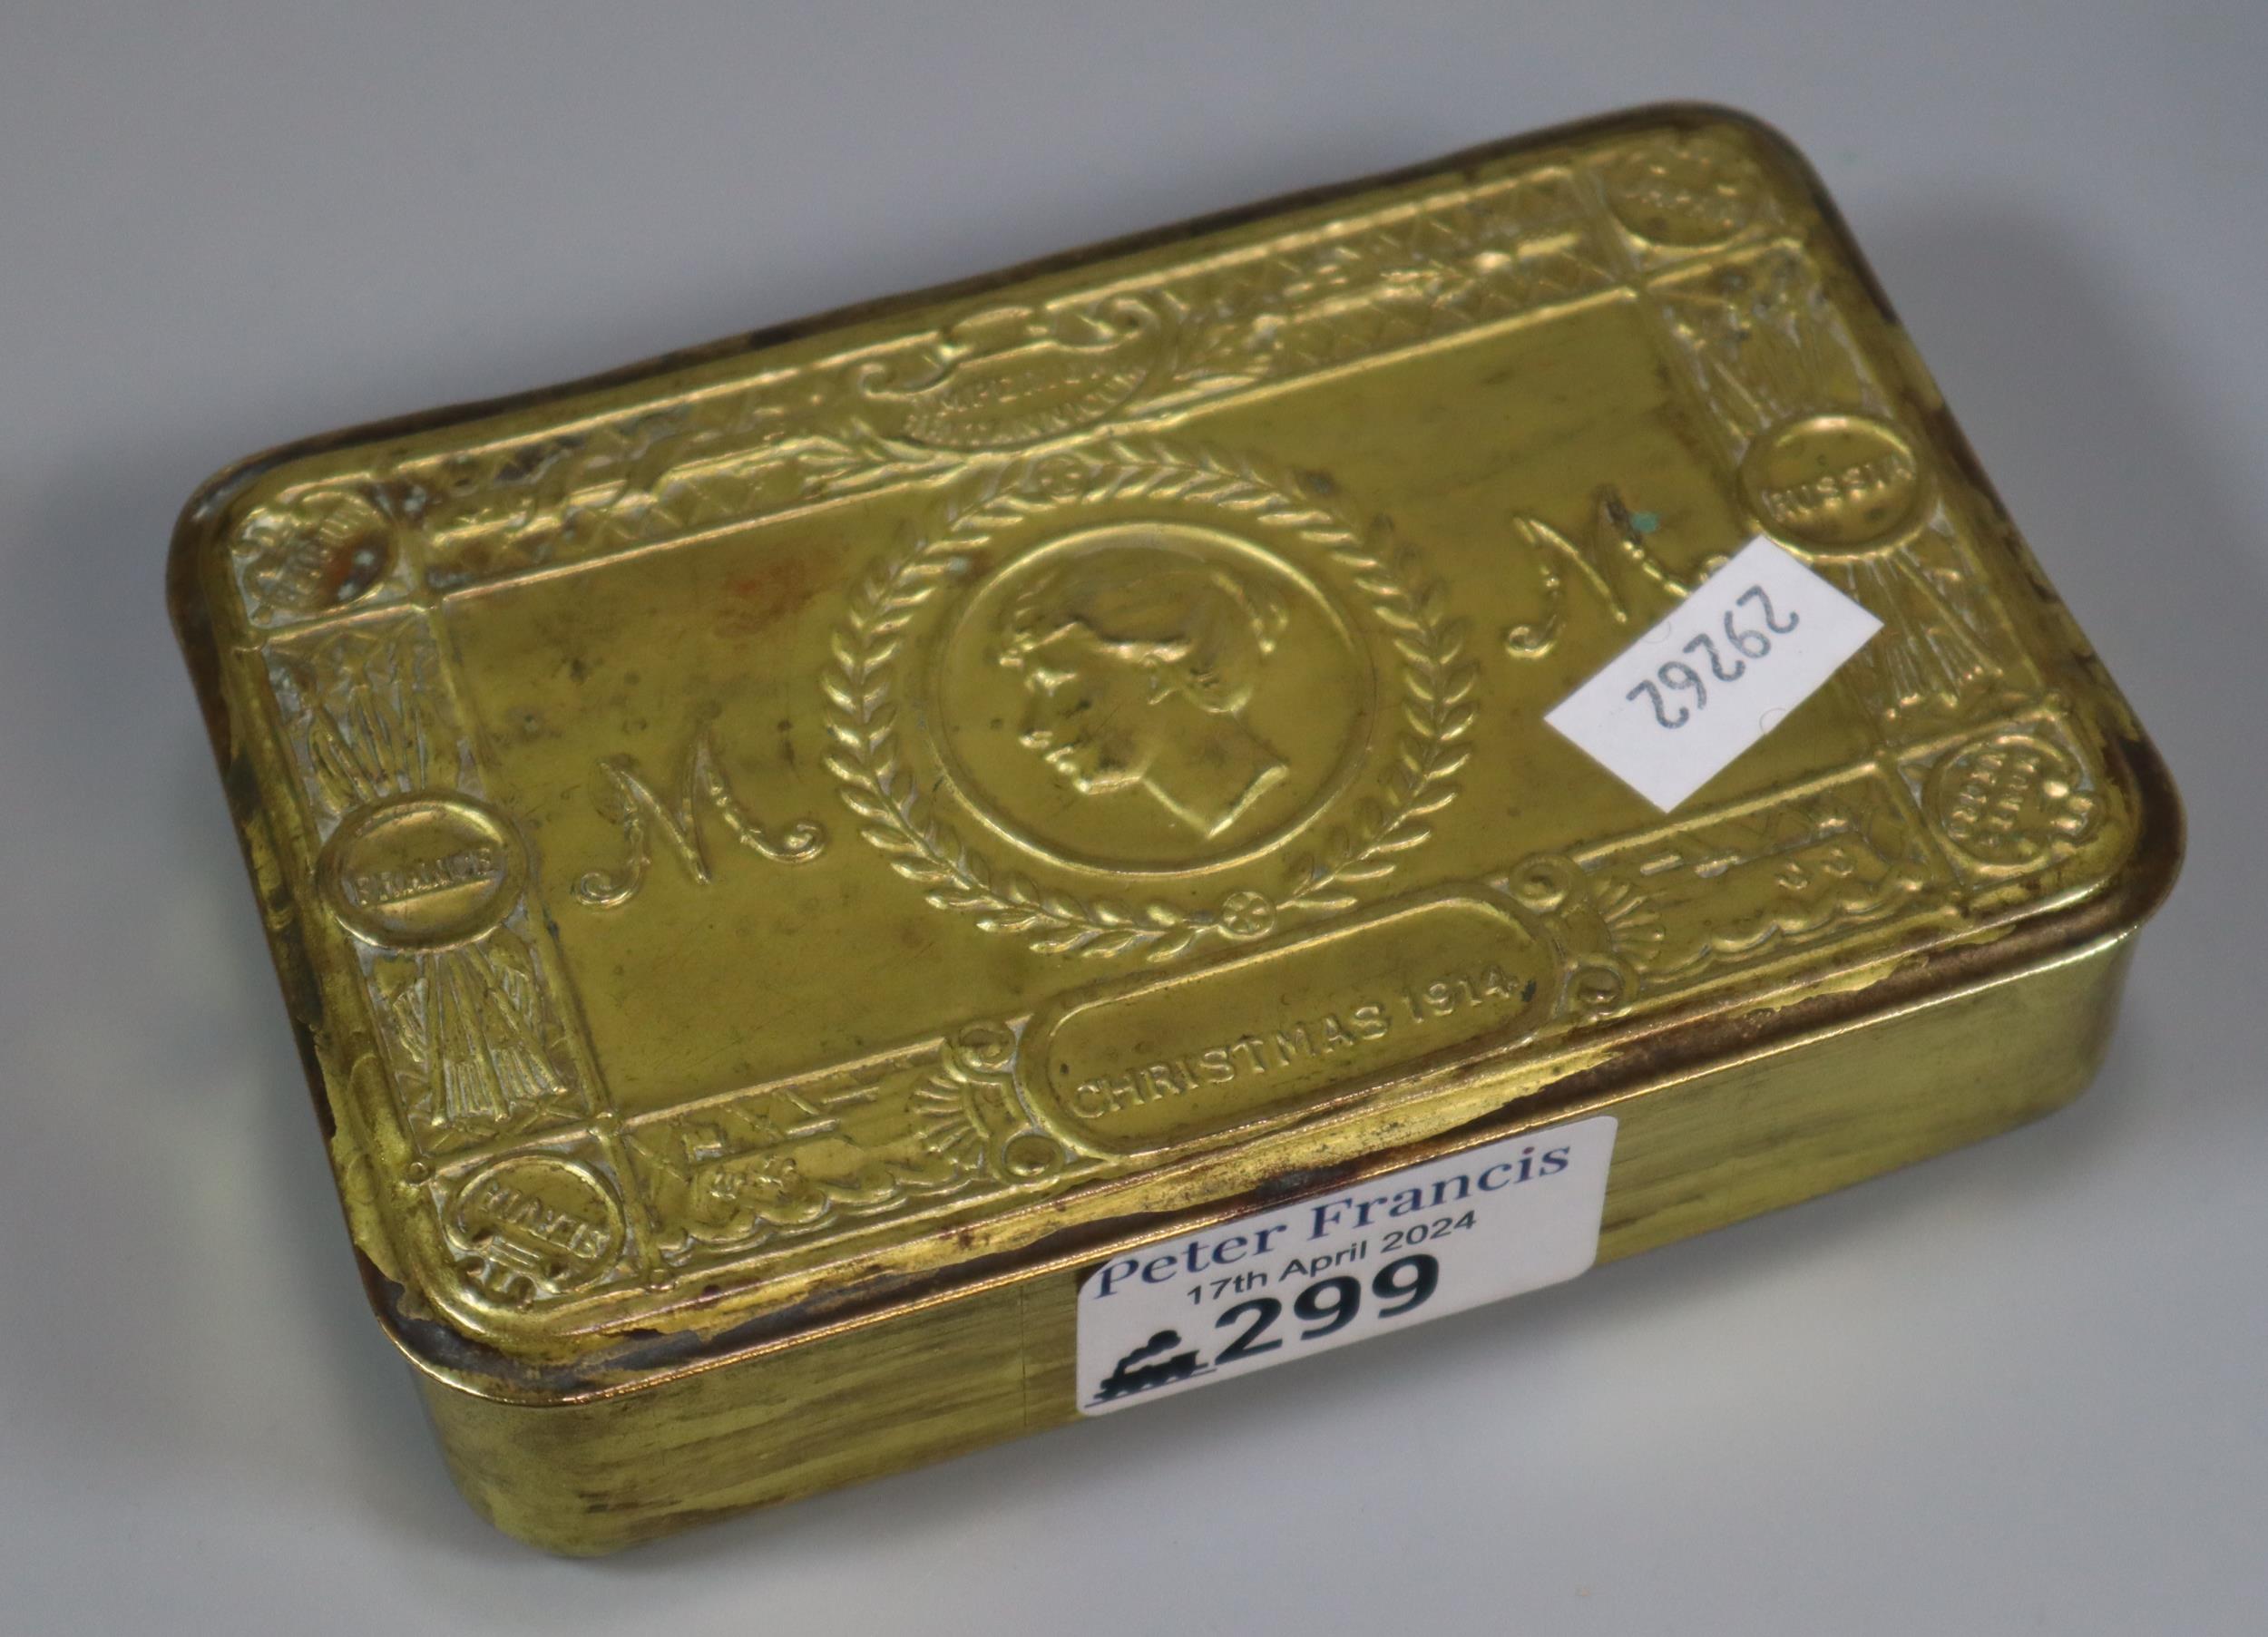 Christmas 1914 WWI Queen Mary's brass tobacco box, lacking contents. (B.P. 21% + VAT)